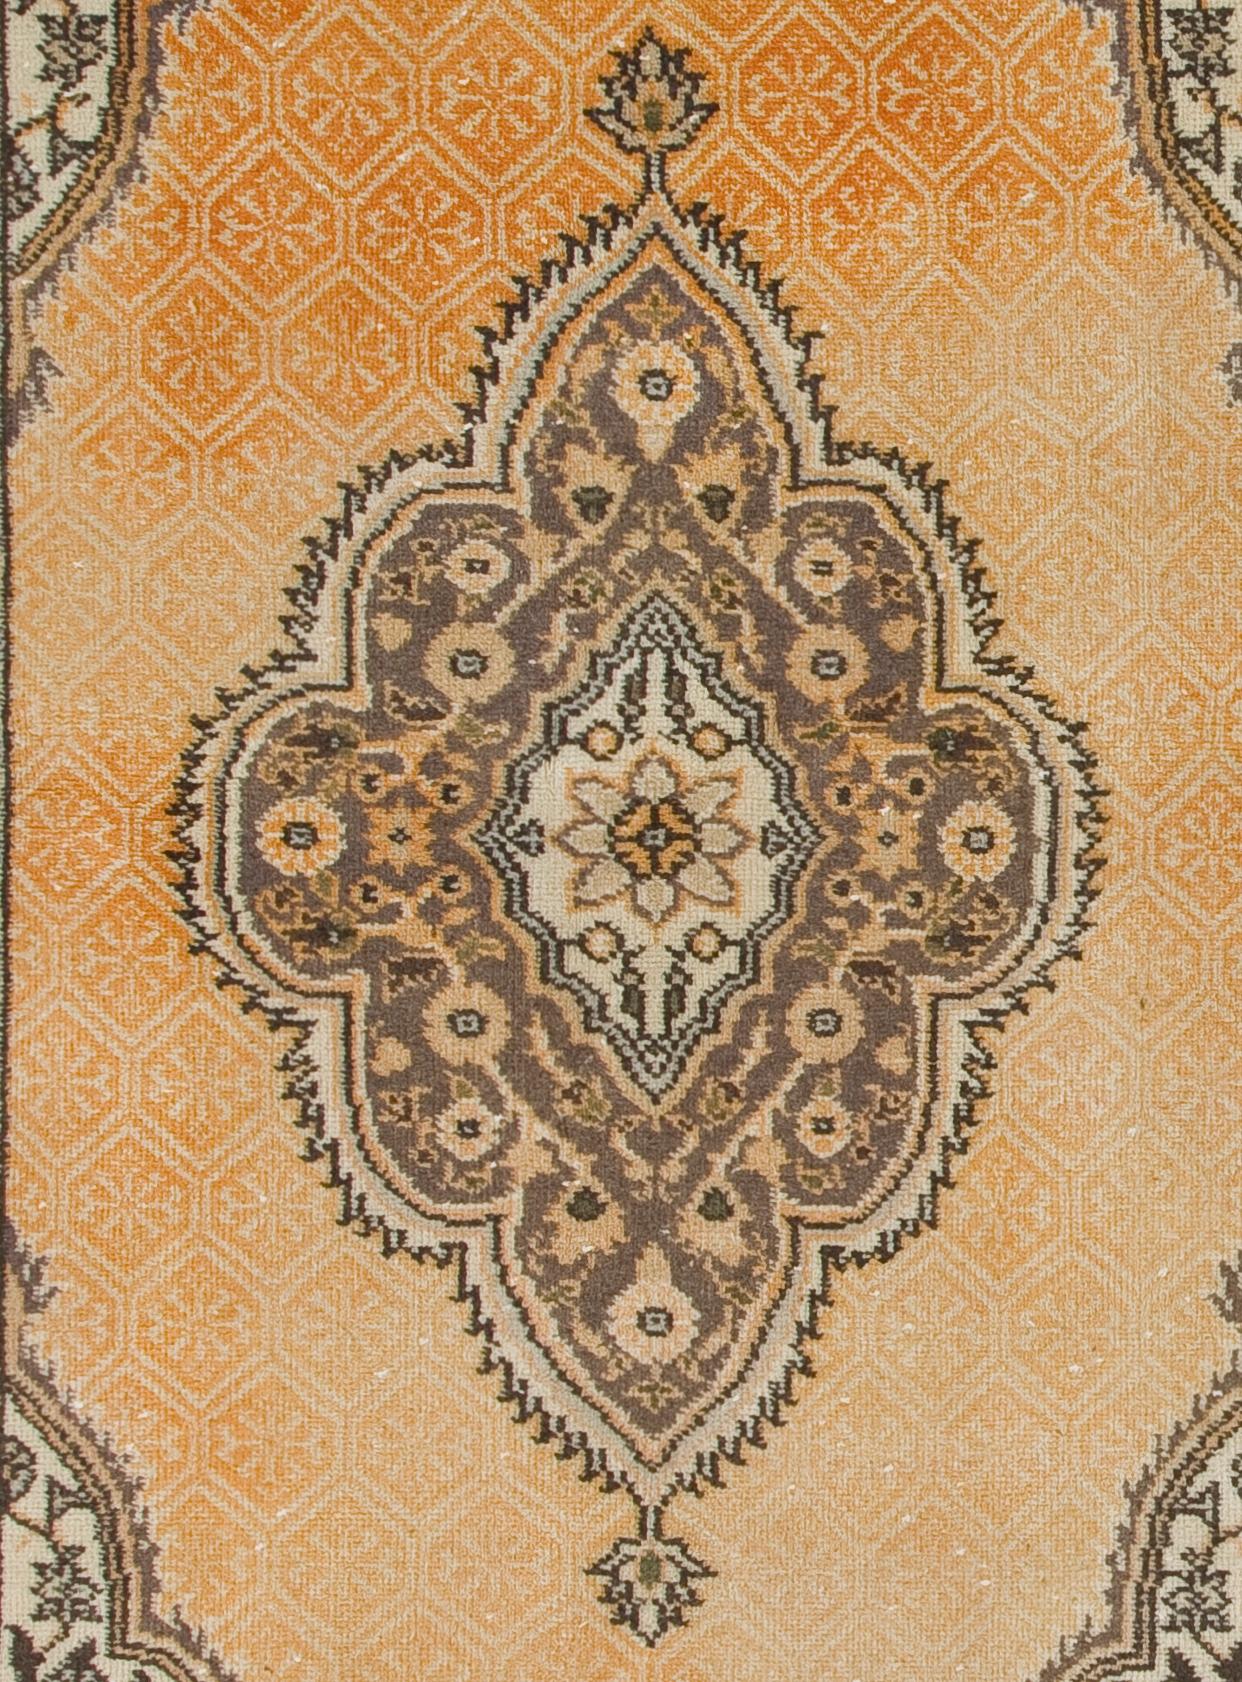 Hand-Woven 4x7 Ft Vintage Handmade Turkish Accent Rug with Geometric Medallion Design For Sale